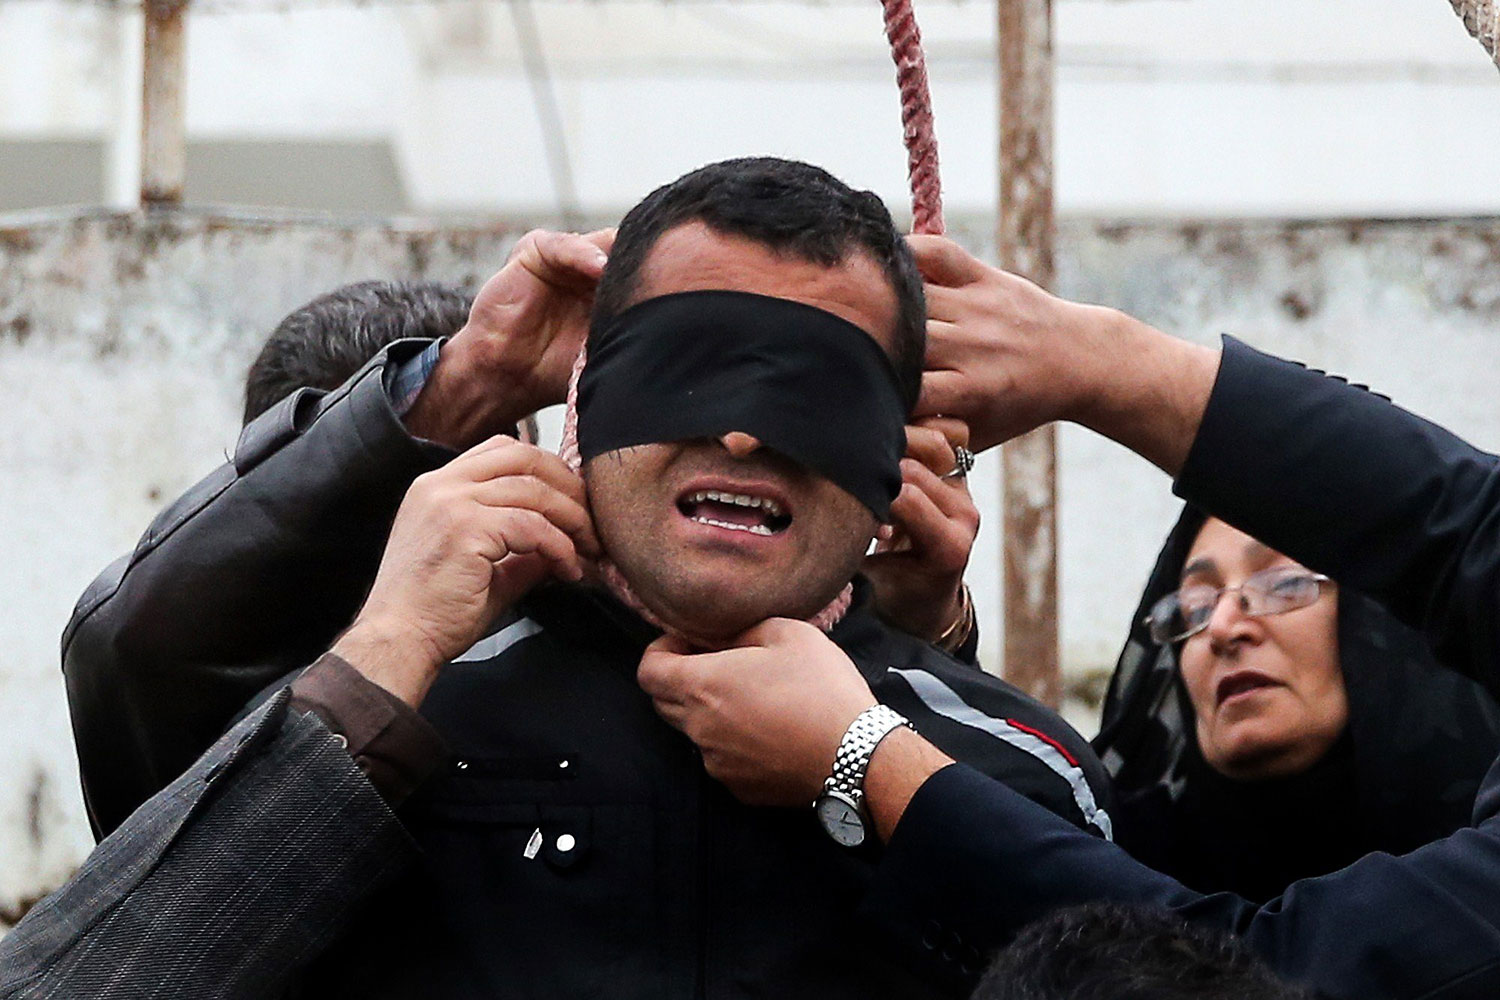 The mother of Abdolah Hosseinzadeh, who was murdered in 2007, removes the noose with the help of her husband from around the neck of Balal, who killed her son, during the execution ceremony in the northern city of Nowshahr on April 15, 2014, sparing the life of her son's convicted murderer.